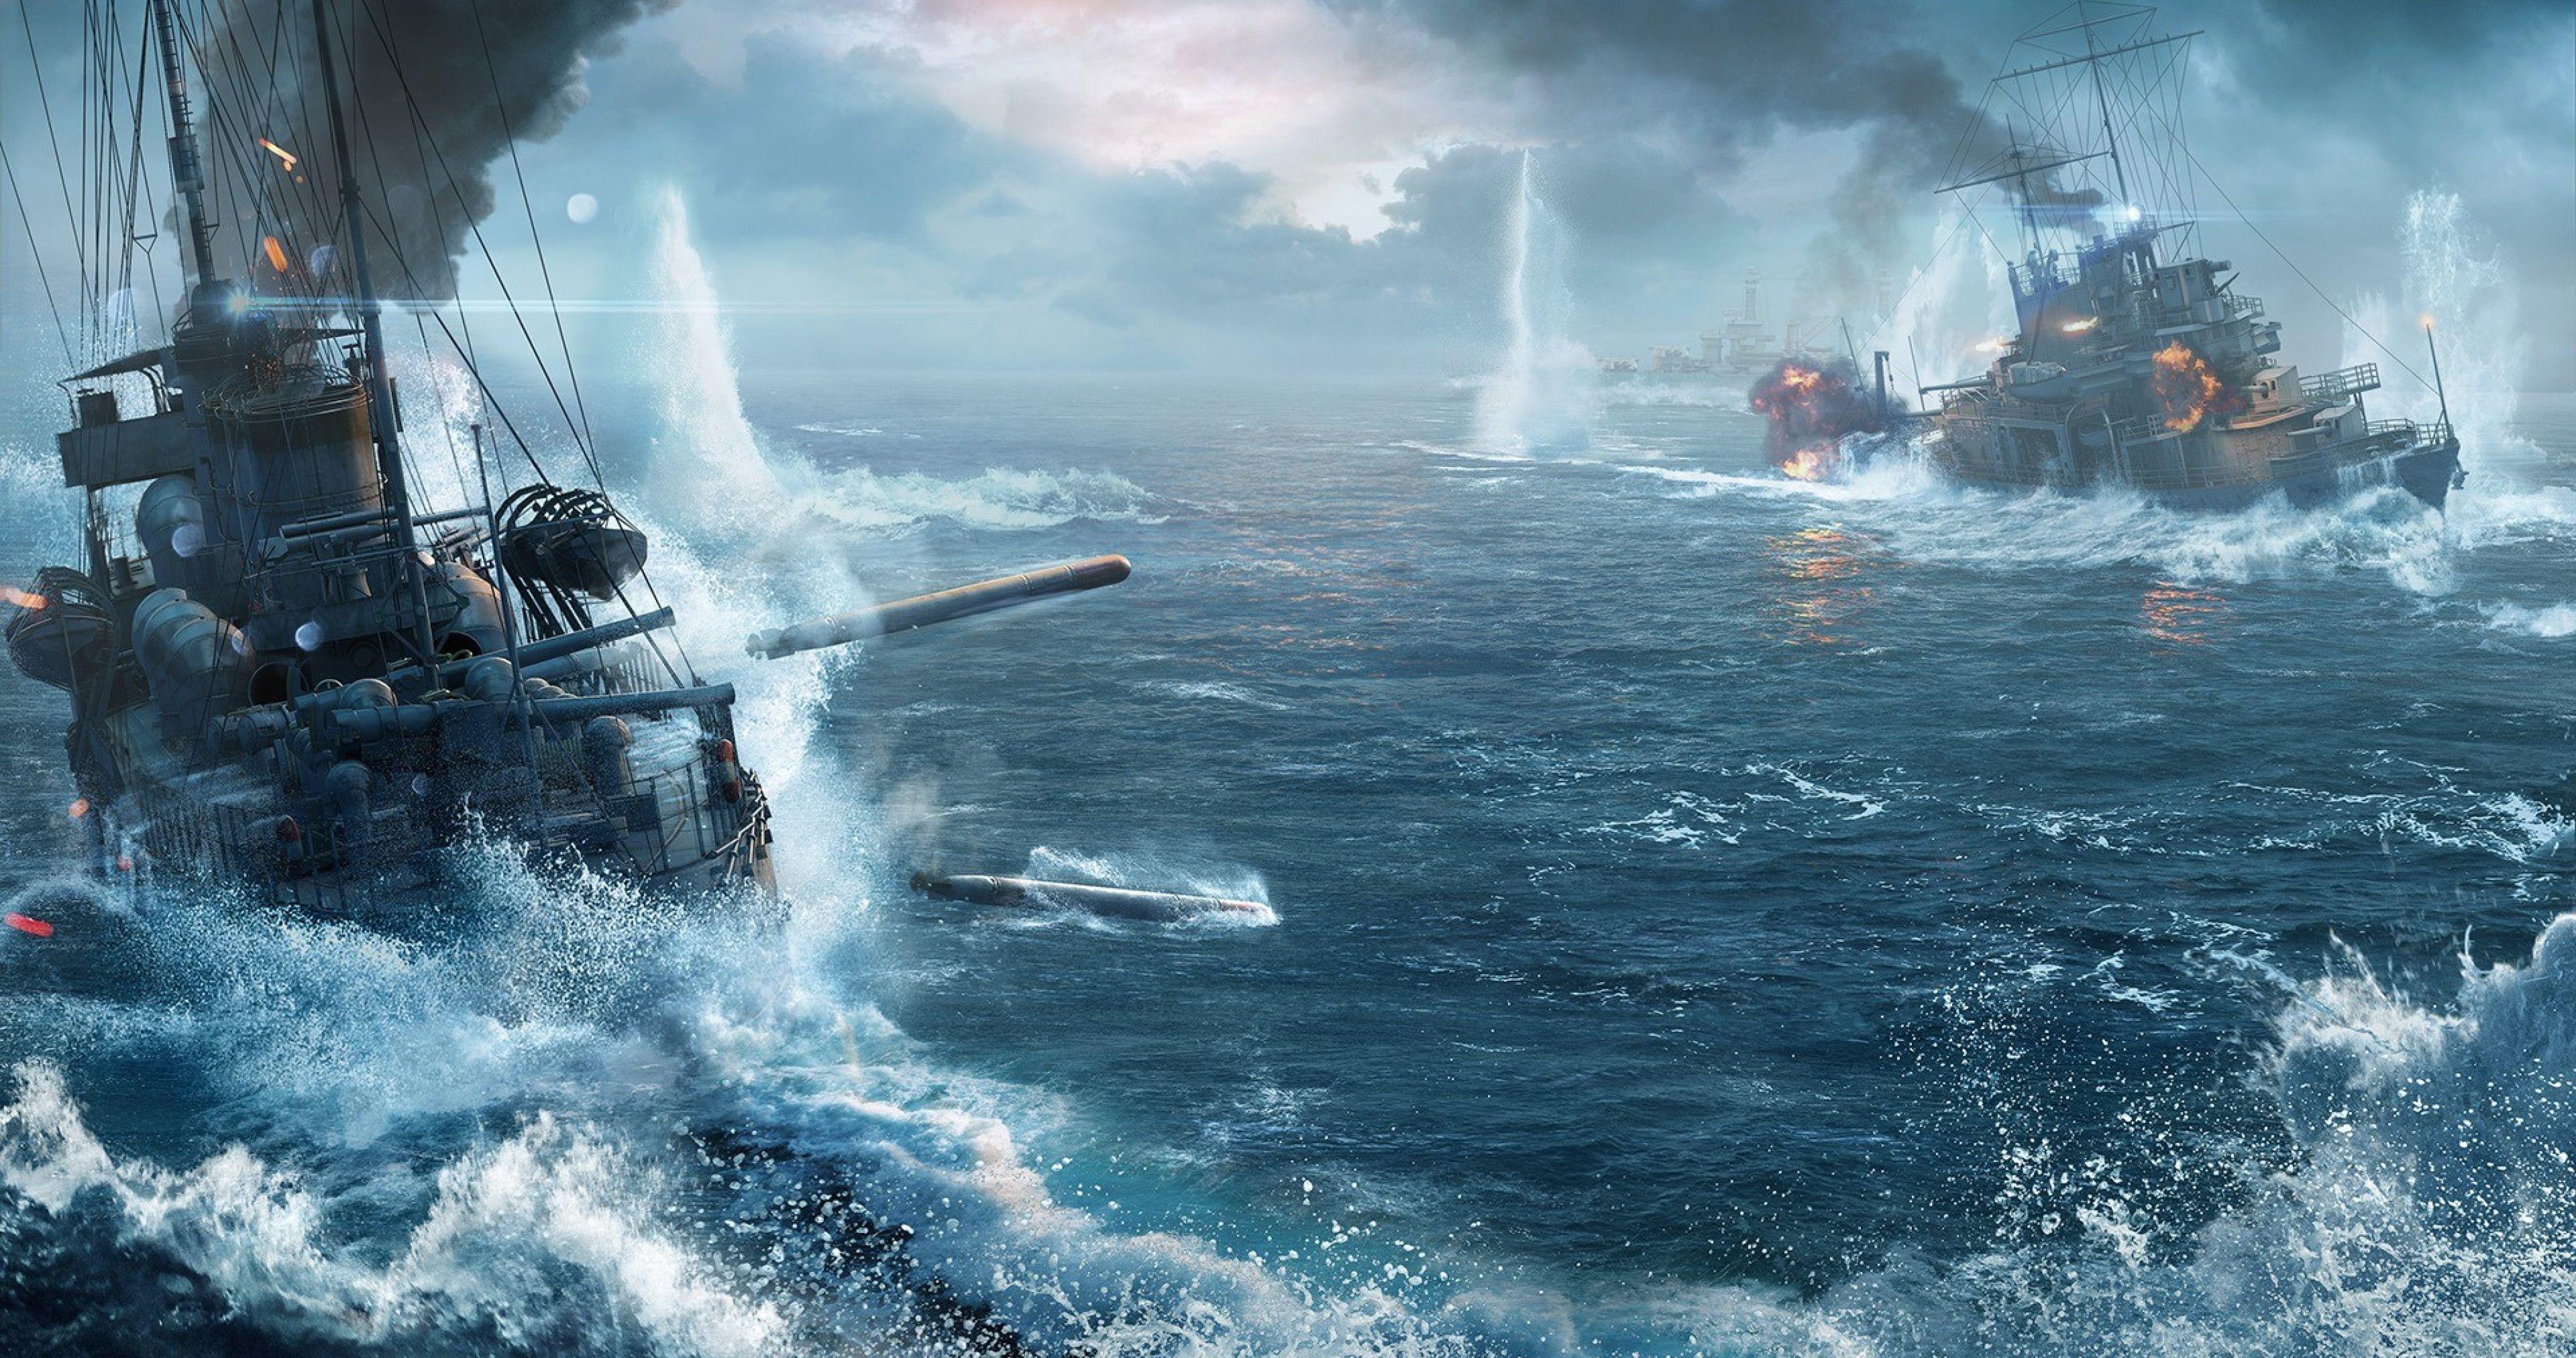 World of Warships Wallpaper Image Photo Picture Background